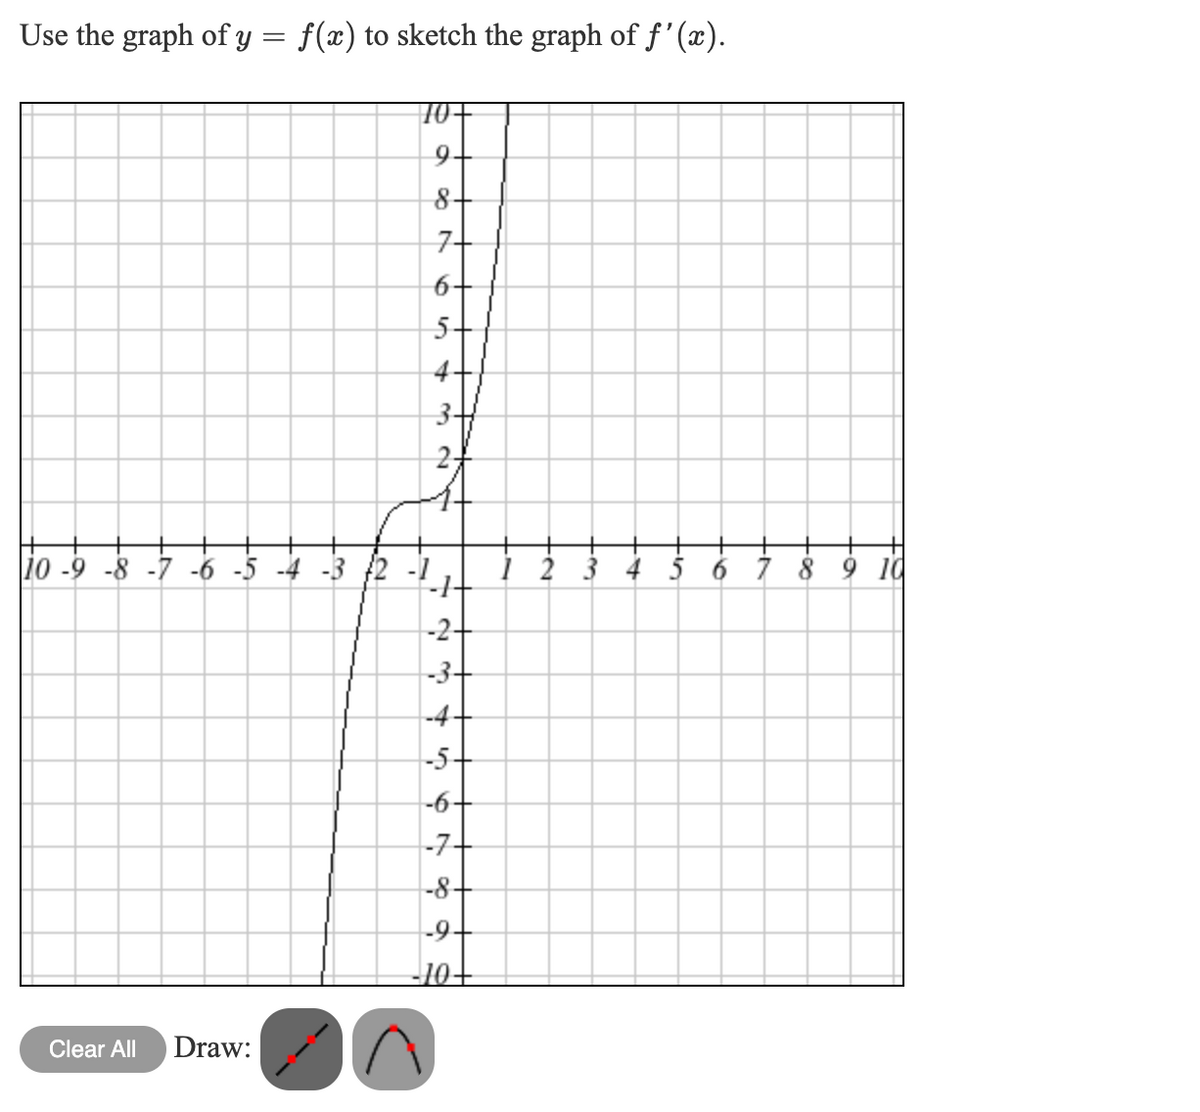 Use the graph of y = f(x) to sketch the graph of f'(x).
10+
8+
7+
6+
5+
4-
10 -9 -8 -7 -6 -5
-3
2 3 4 5
6 7 8 9 10
-2+
-3+
-5+
-6+
-7+
-8+
-9
Clear All
Draw:
